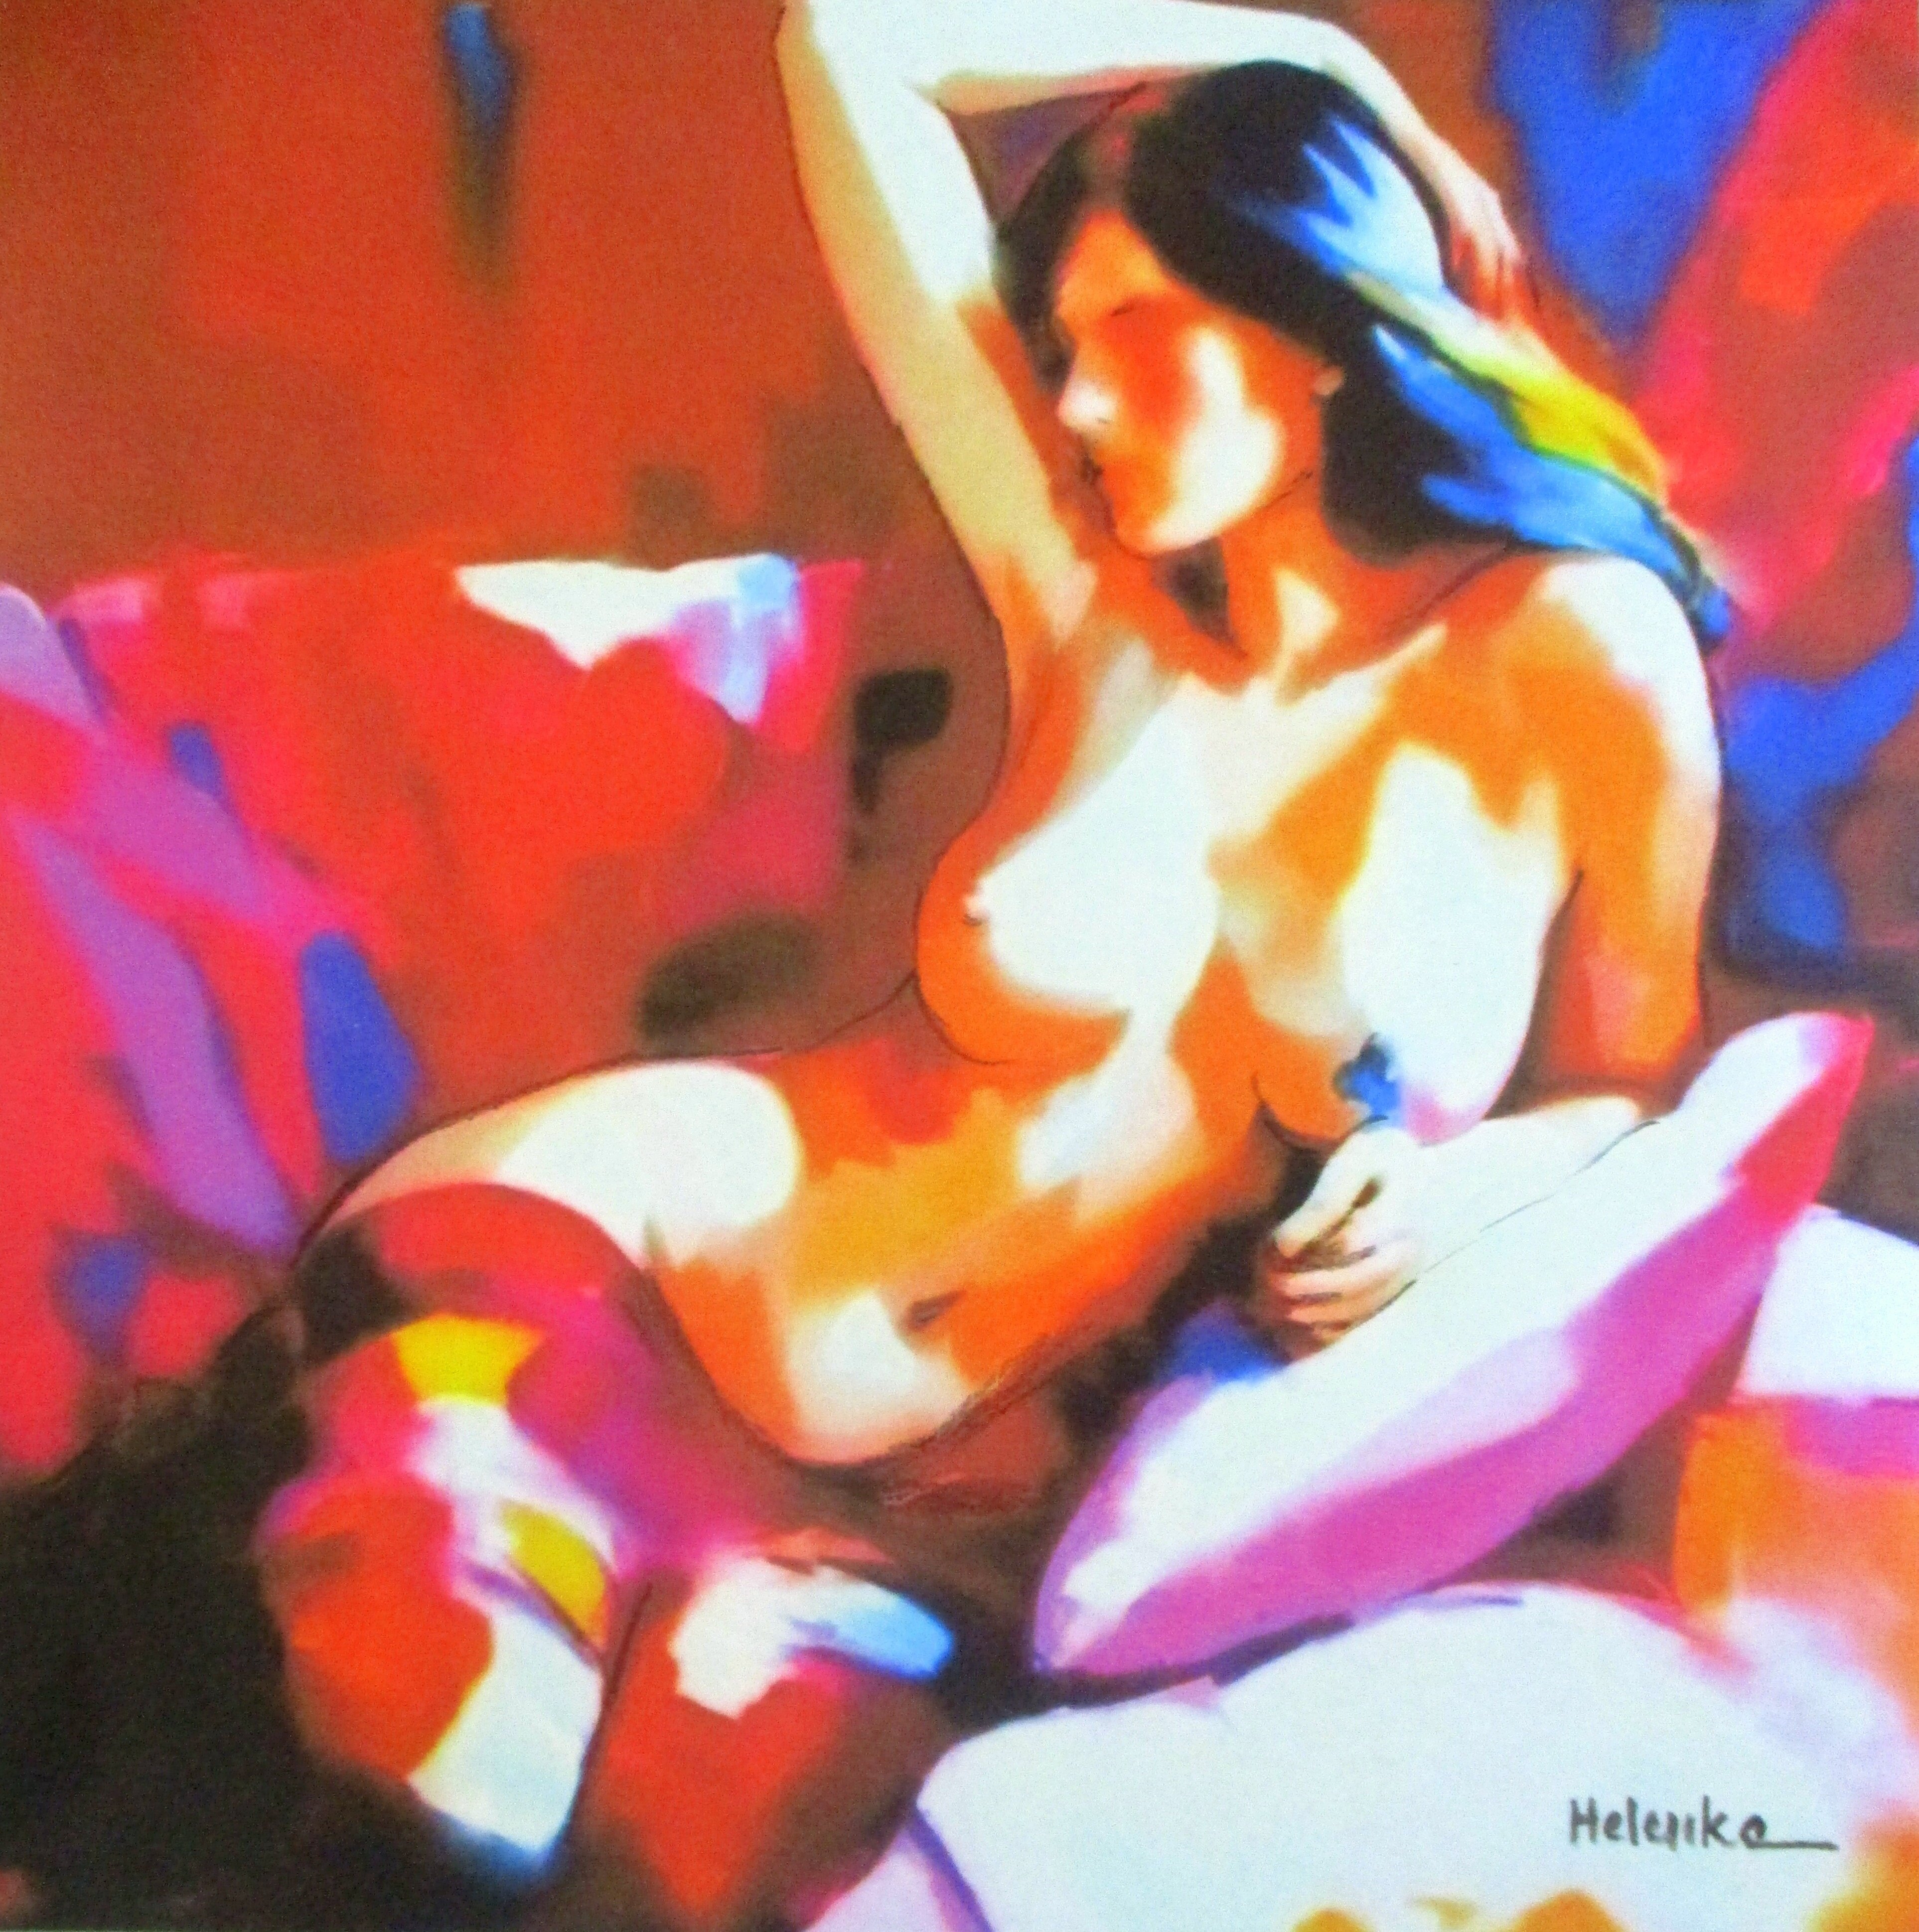 Helena Wierzbicki; Glowing Ruby, 2023, Original Painting Acrylic, 10.3 x 10.3 inches. Artwork description: 241 A semi- abstract canvas within hues of warmth. A symphony of colors, the painting s muse, the female nude. A timeless symbol of life and solitude.In brushstrokes, soft curves and shadows conjuring embrace.Her body, an ode to feminity s bloom, captures her essence, from fiery ...